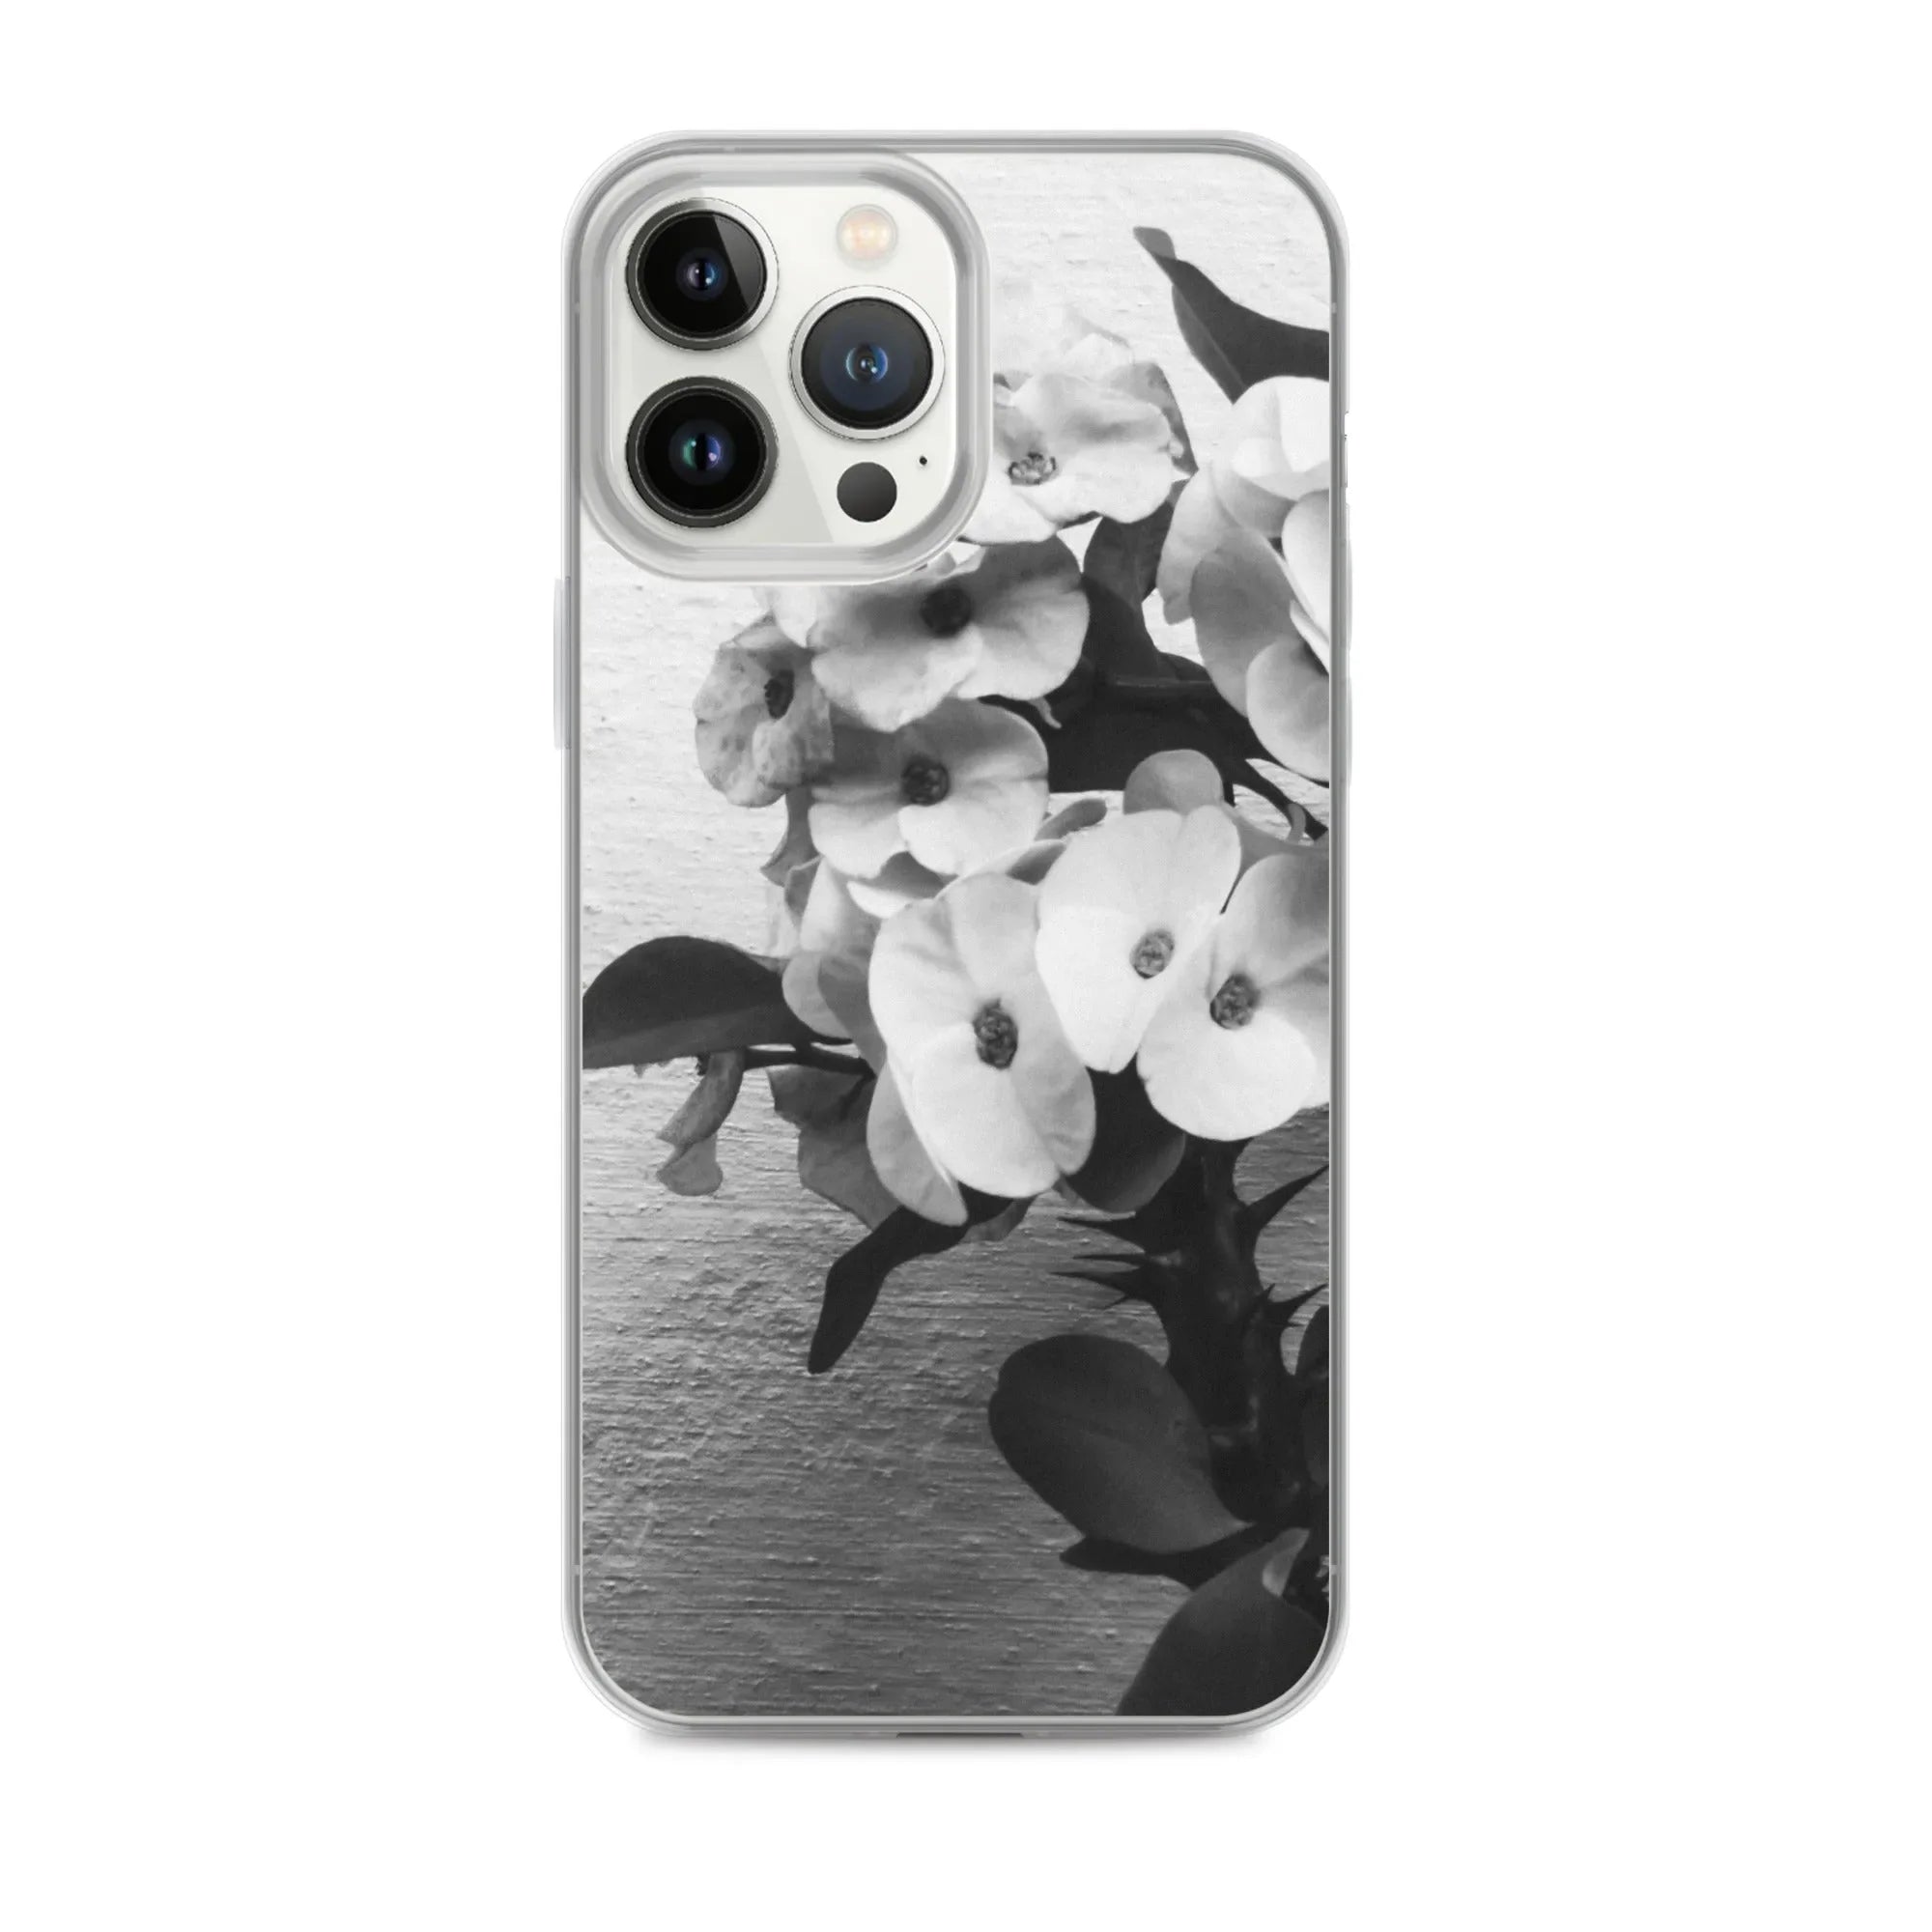 Wallflower Floral Iphone Case - Black And White - Iphone 13 Pro Max - Mobile Phone Cases - Aesthetic Art